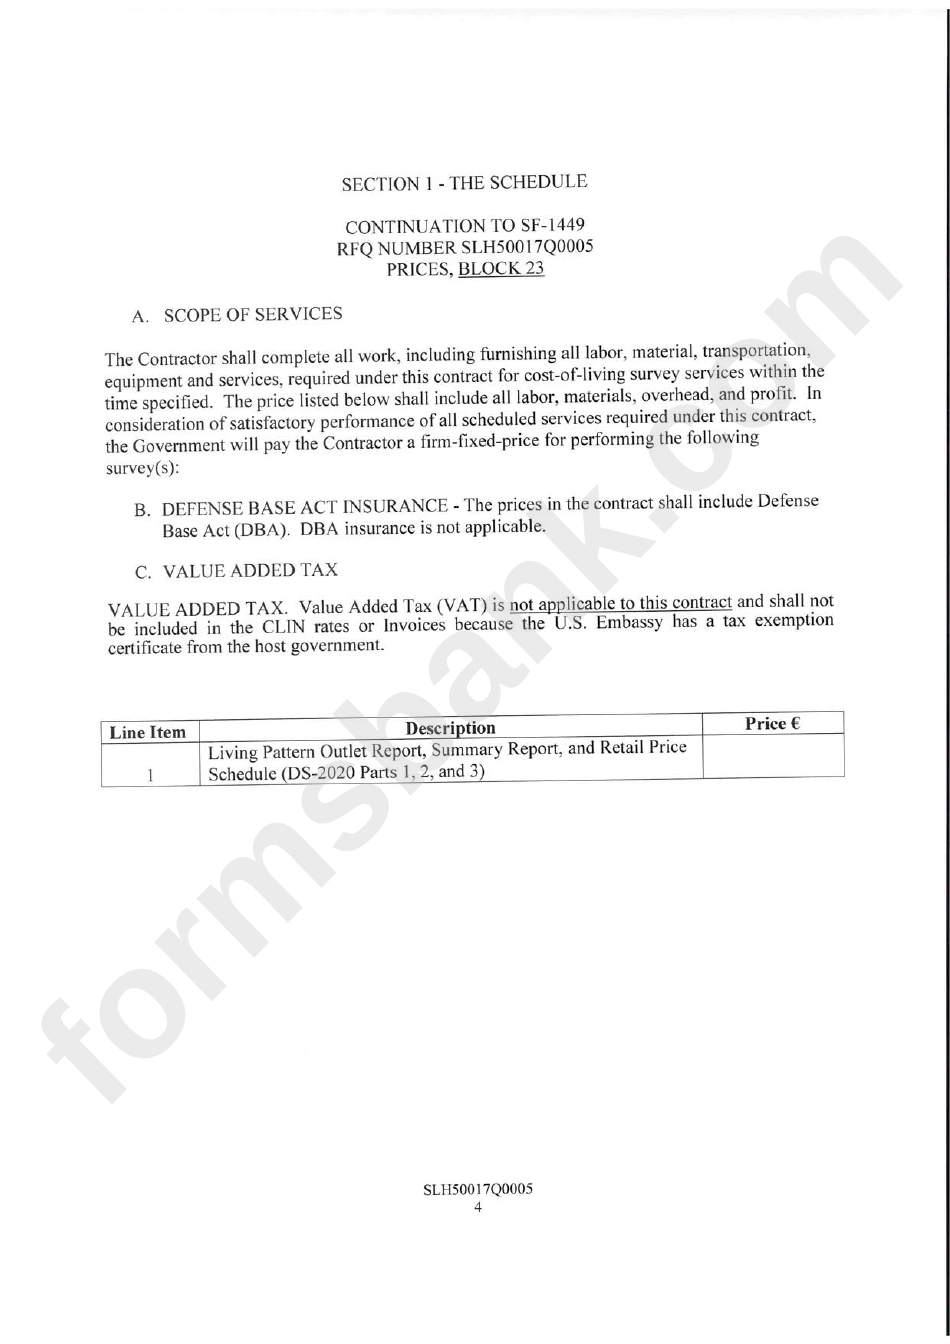 Form 1449 - Solicitation / Contract / Order For Commercial Items